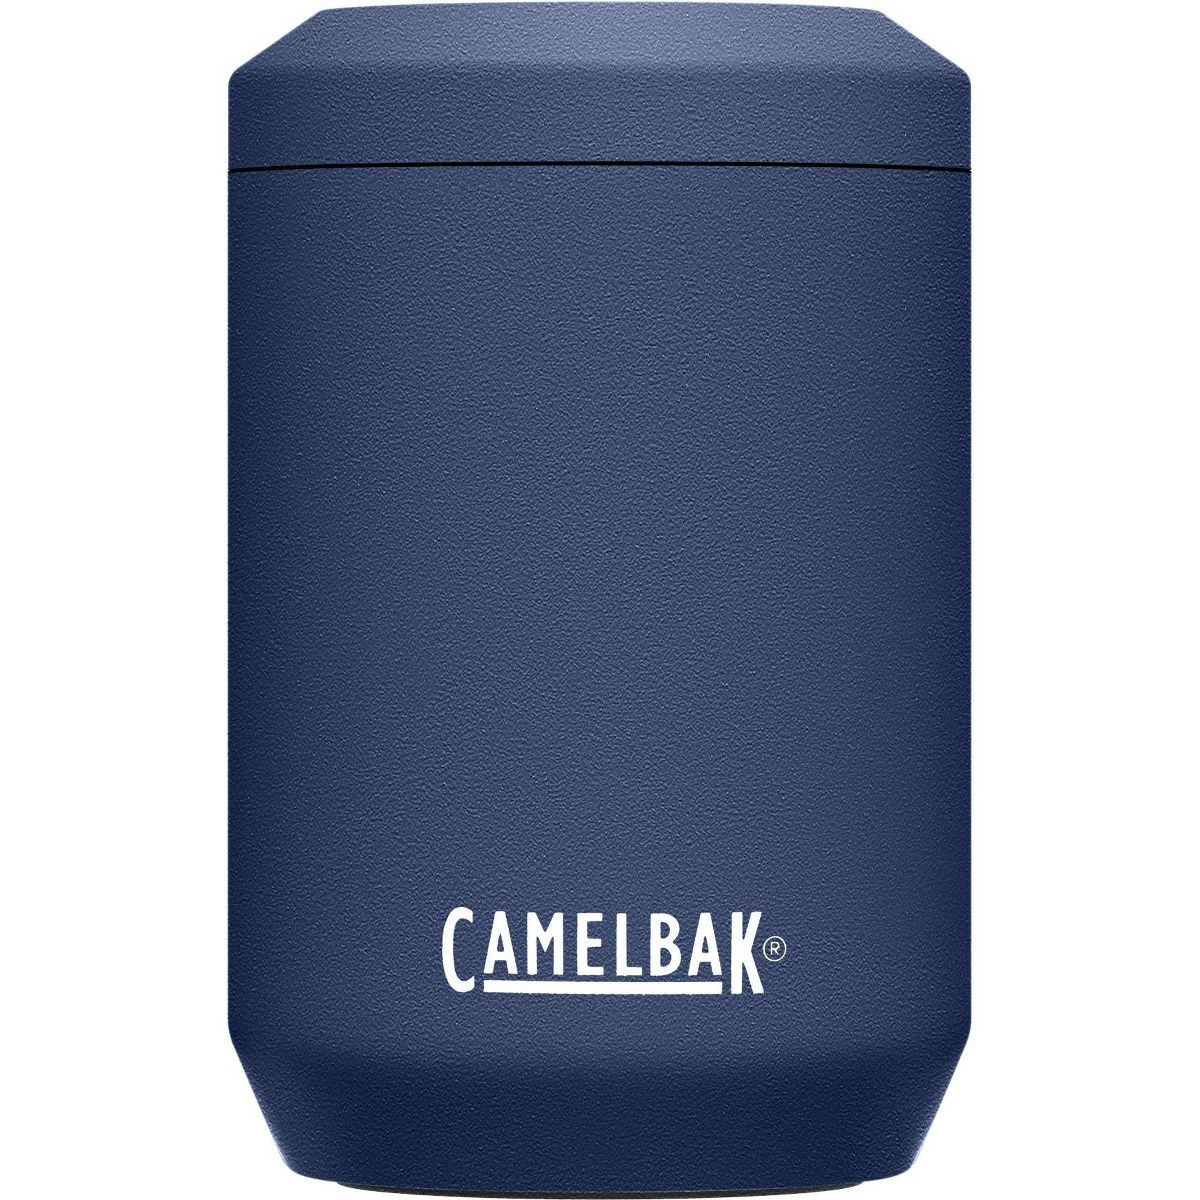 CamelBak 12oz Vacuum Insulated Stainless Steel Can Cooler | Target